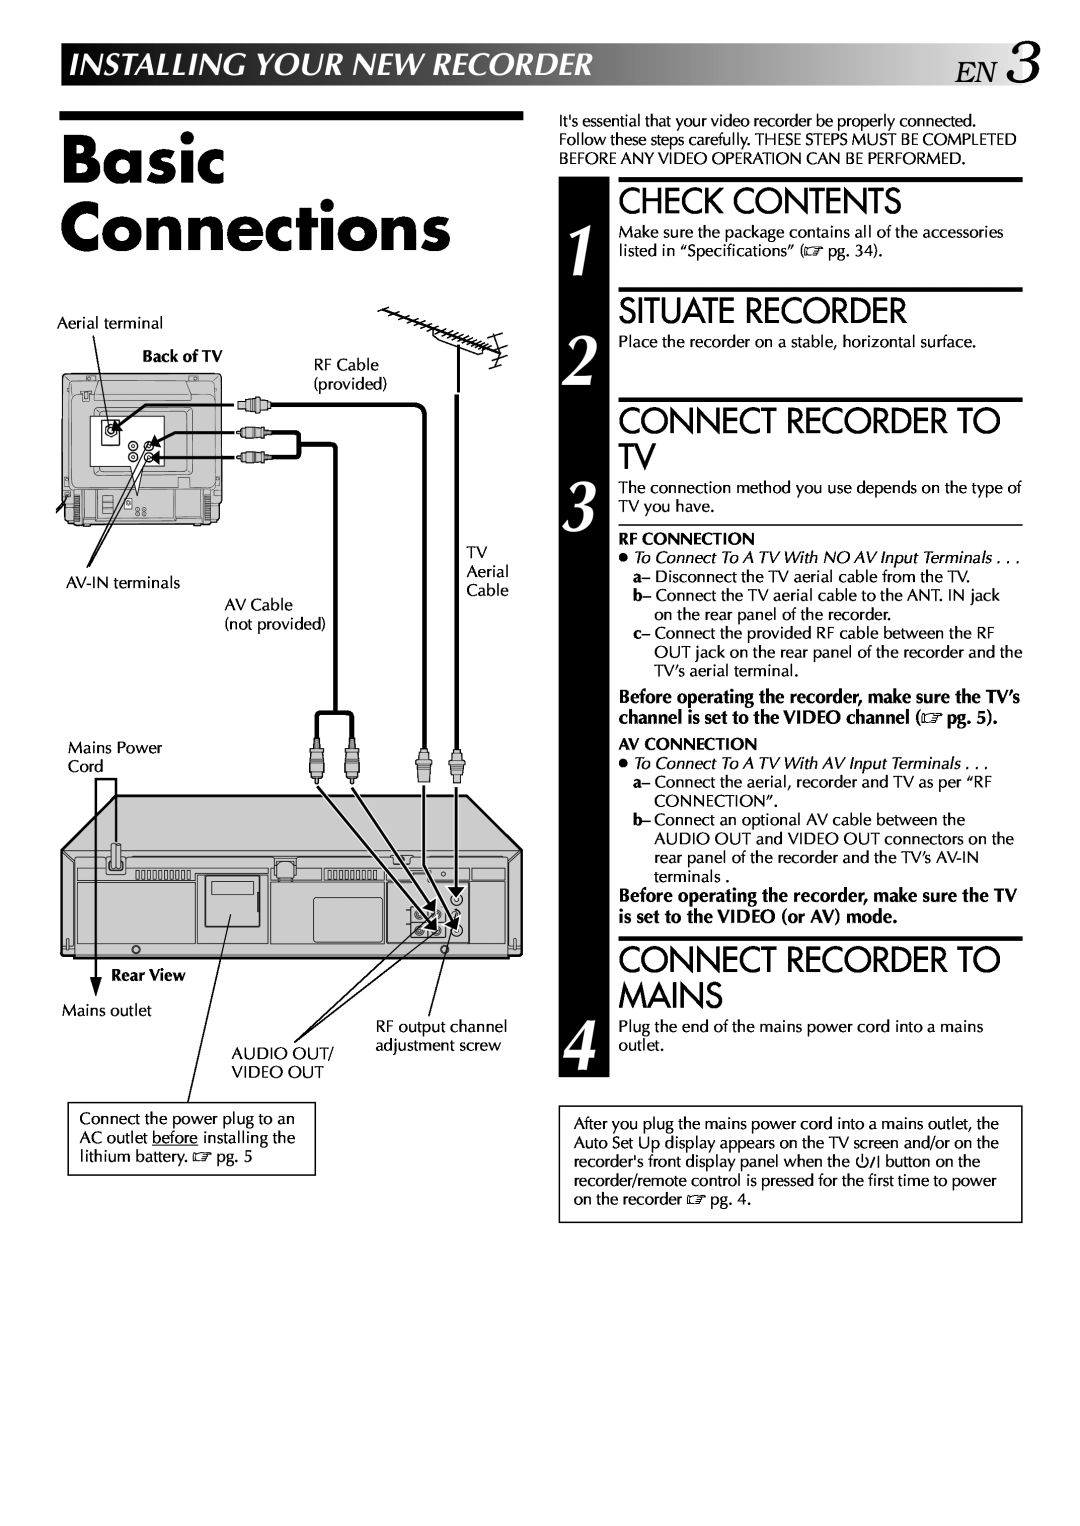 JVC HR-J245EA Basic Connections, Check Contents, Situate Recorder, Connect Recorder To Mains, INSTALLINGYOURNEWRECORDEREN3 